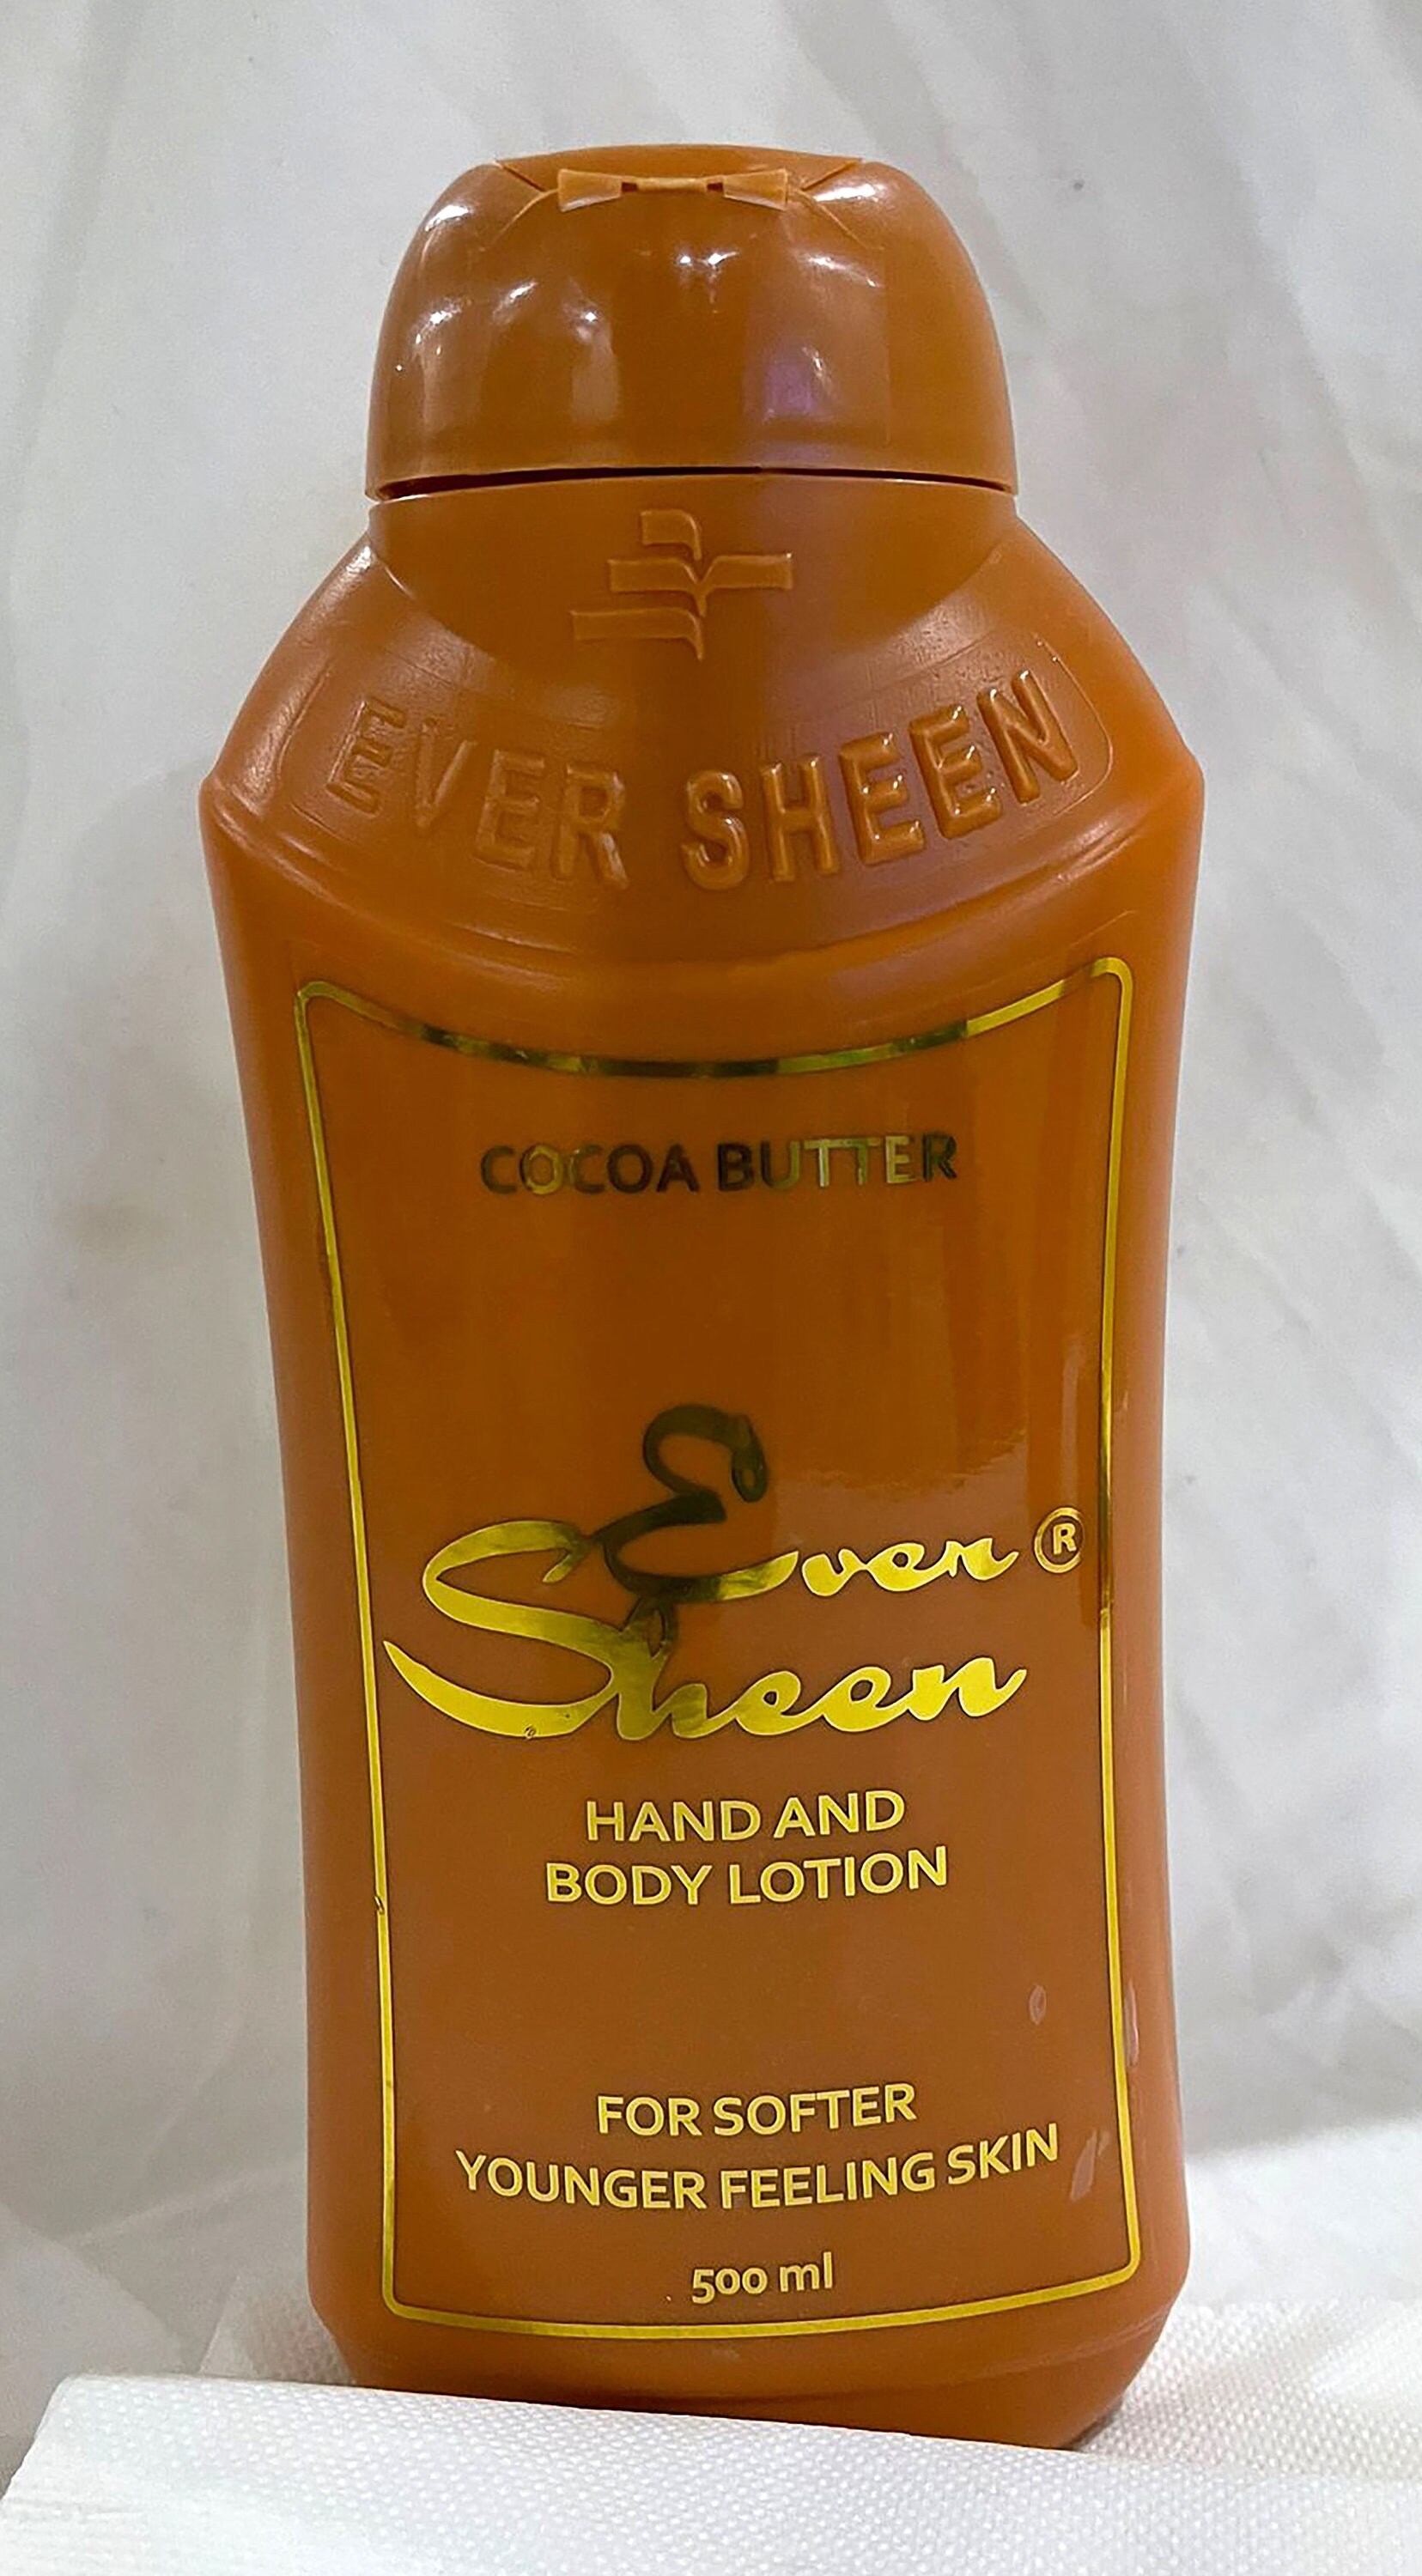 Eversheen Cocoa Butter, Hand and Body Lotion / 500 Ml -  Finland